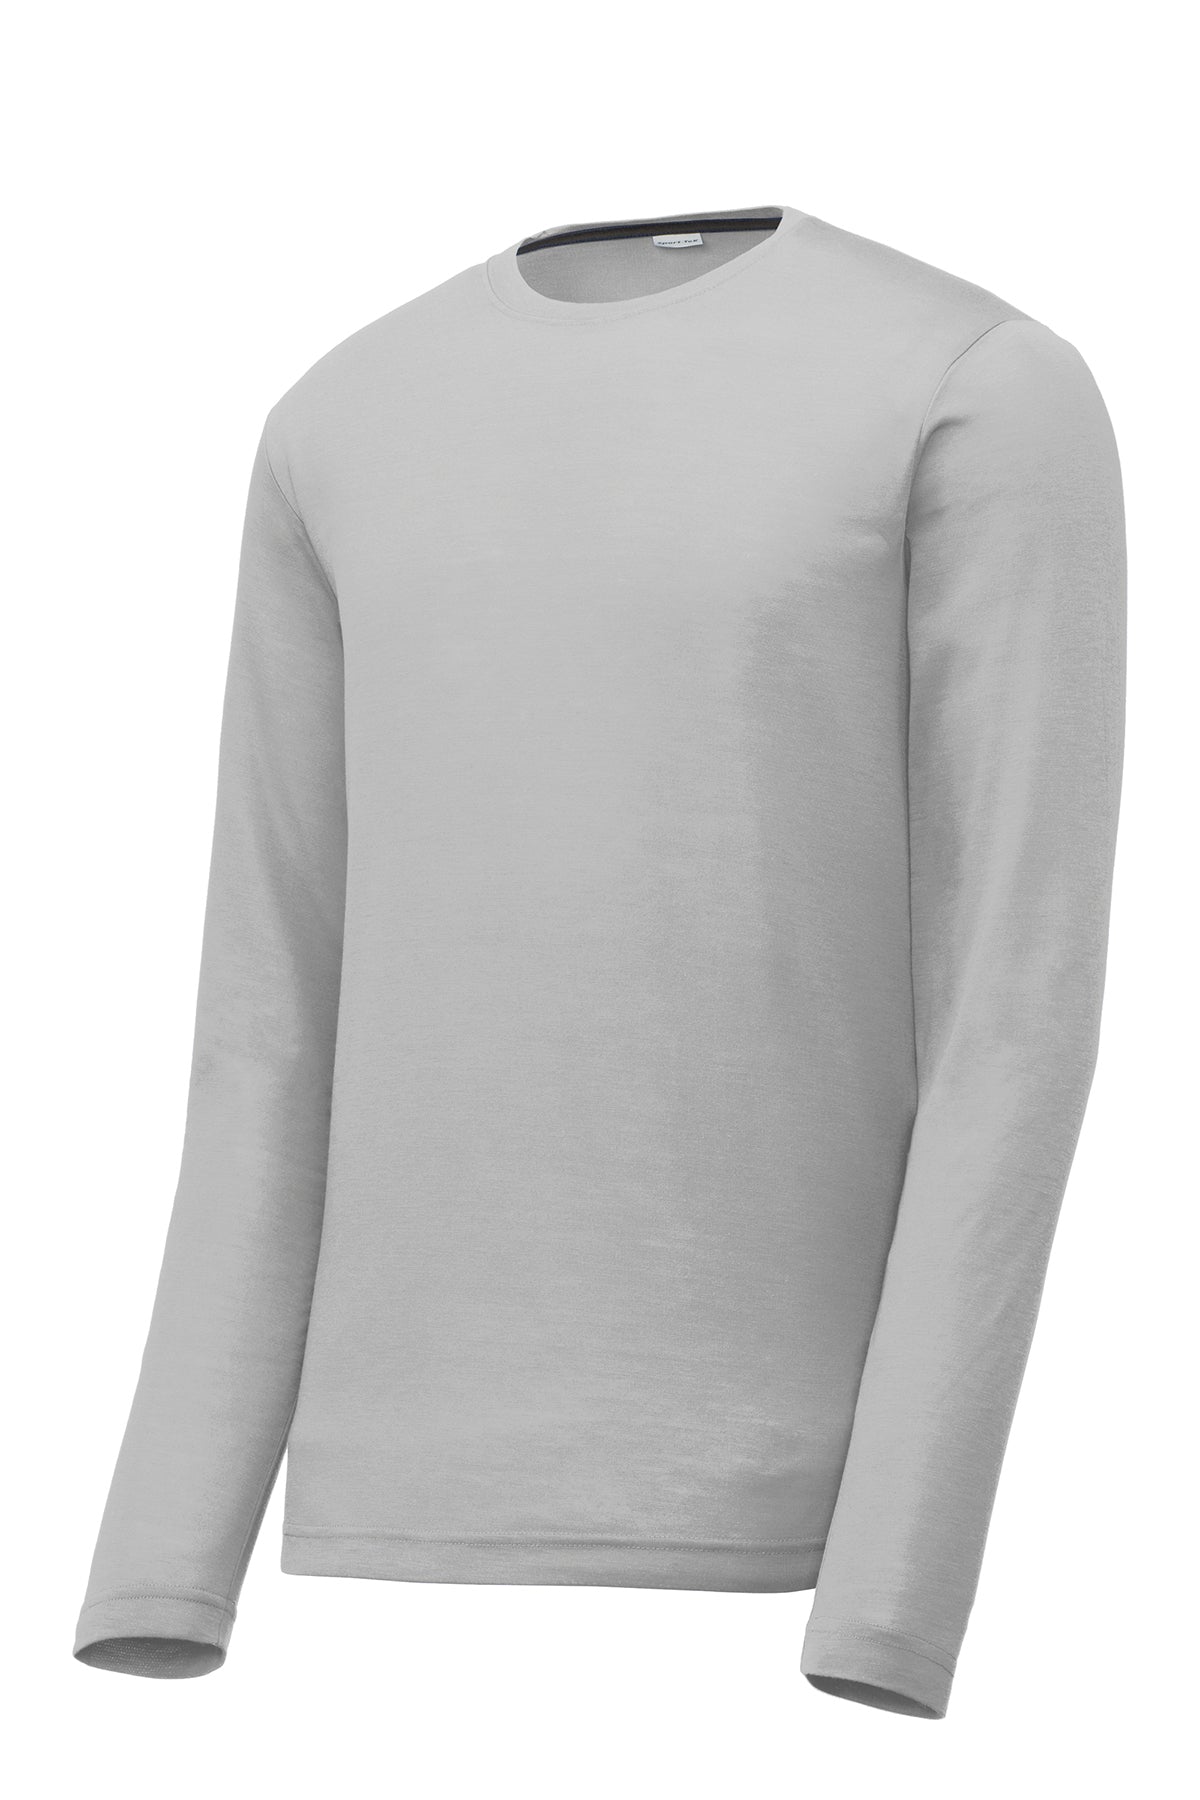 ST450LS Sport-Tek® Long Sleeve PosiCharge® Competitor™ Cotton Touch™ Tee